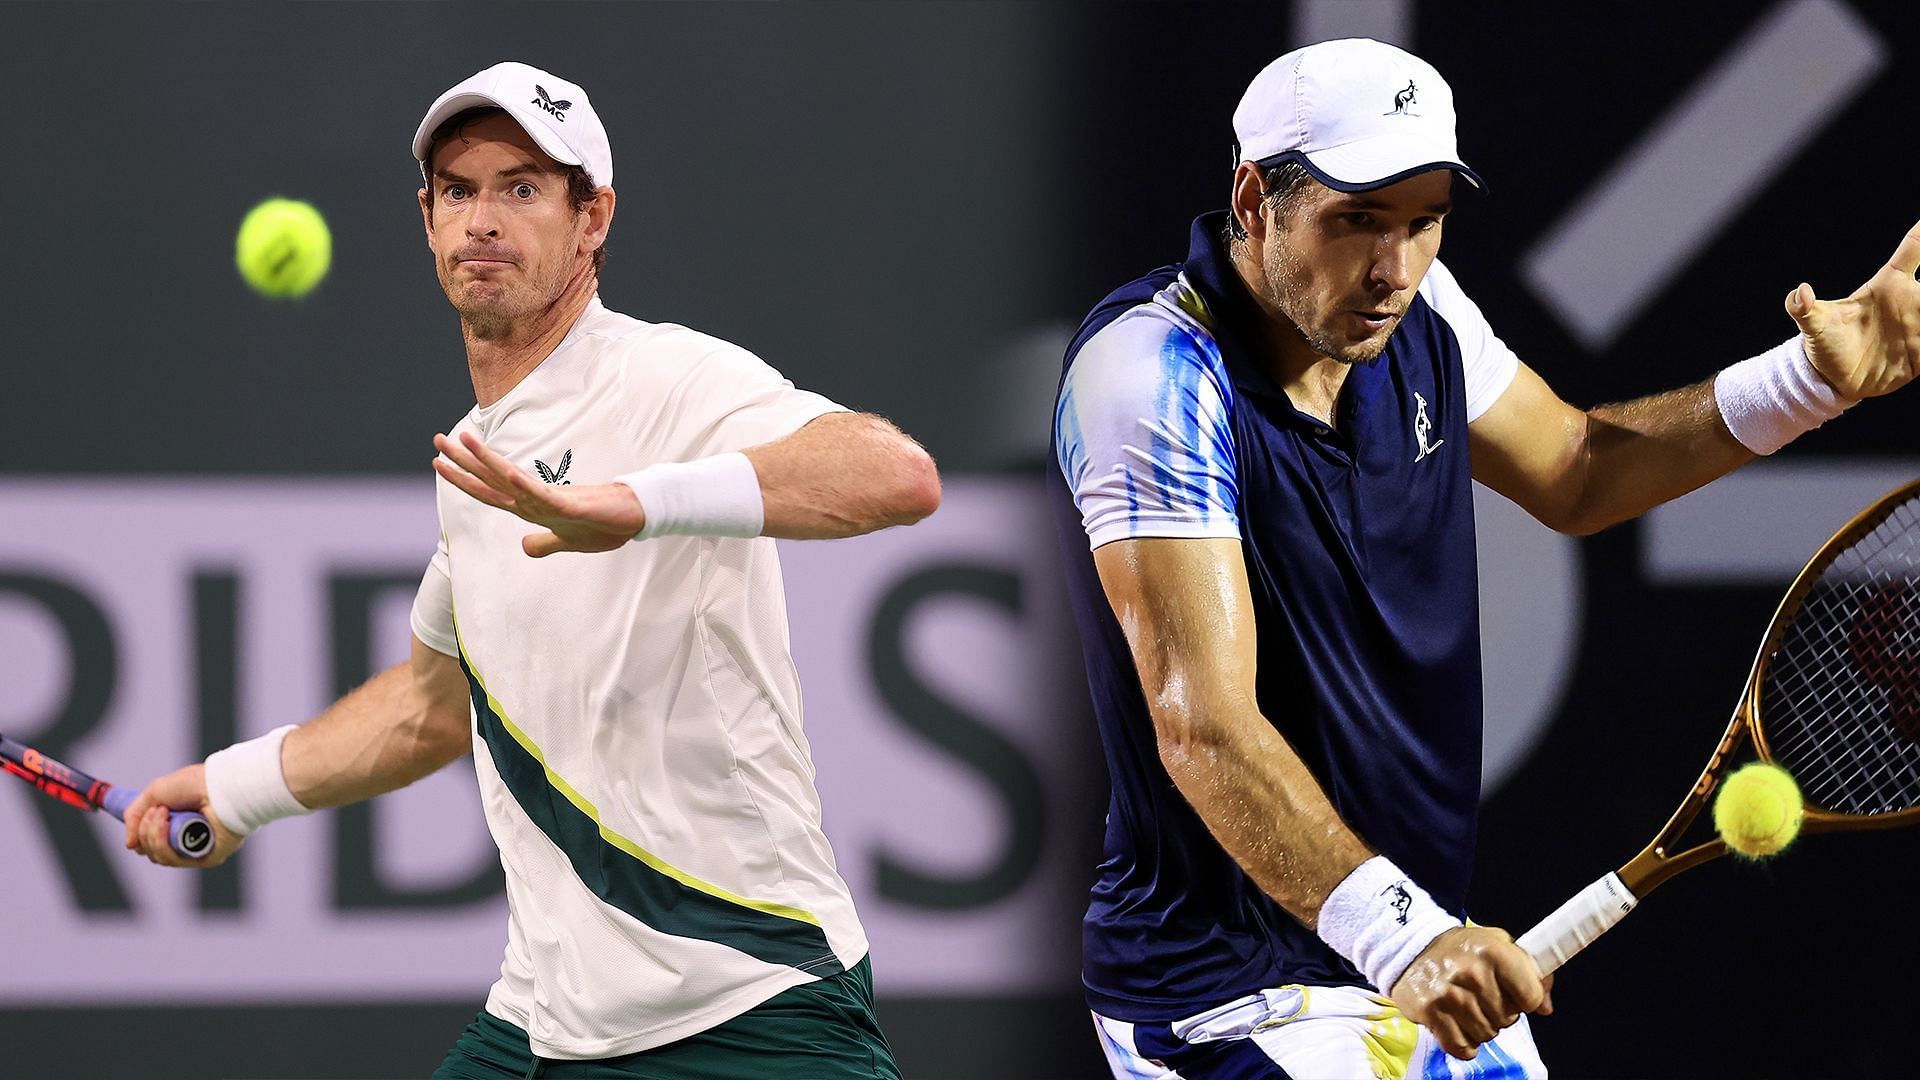 Murray (left) takes on Lajovic in his Miami opener.